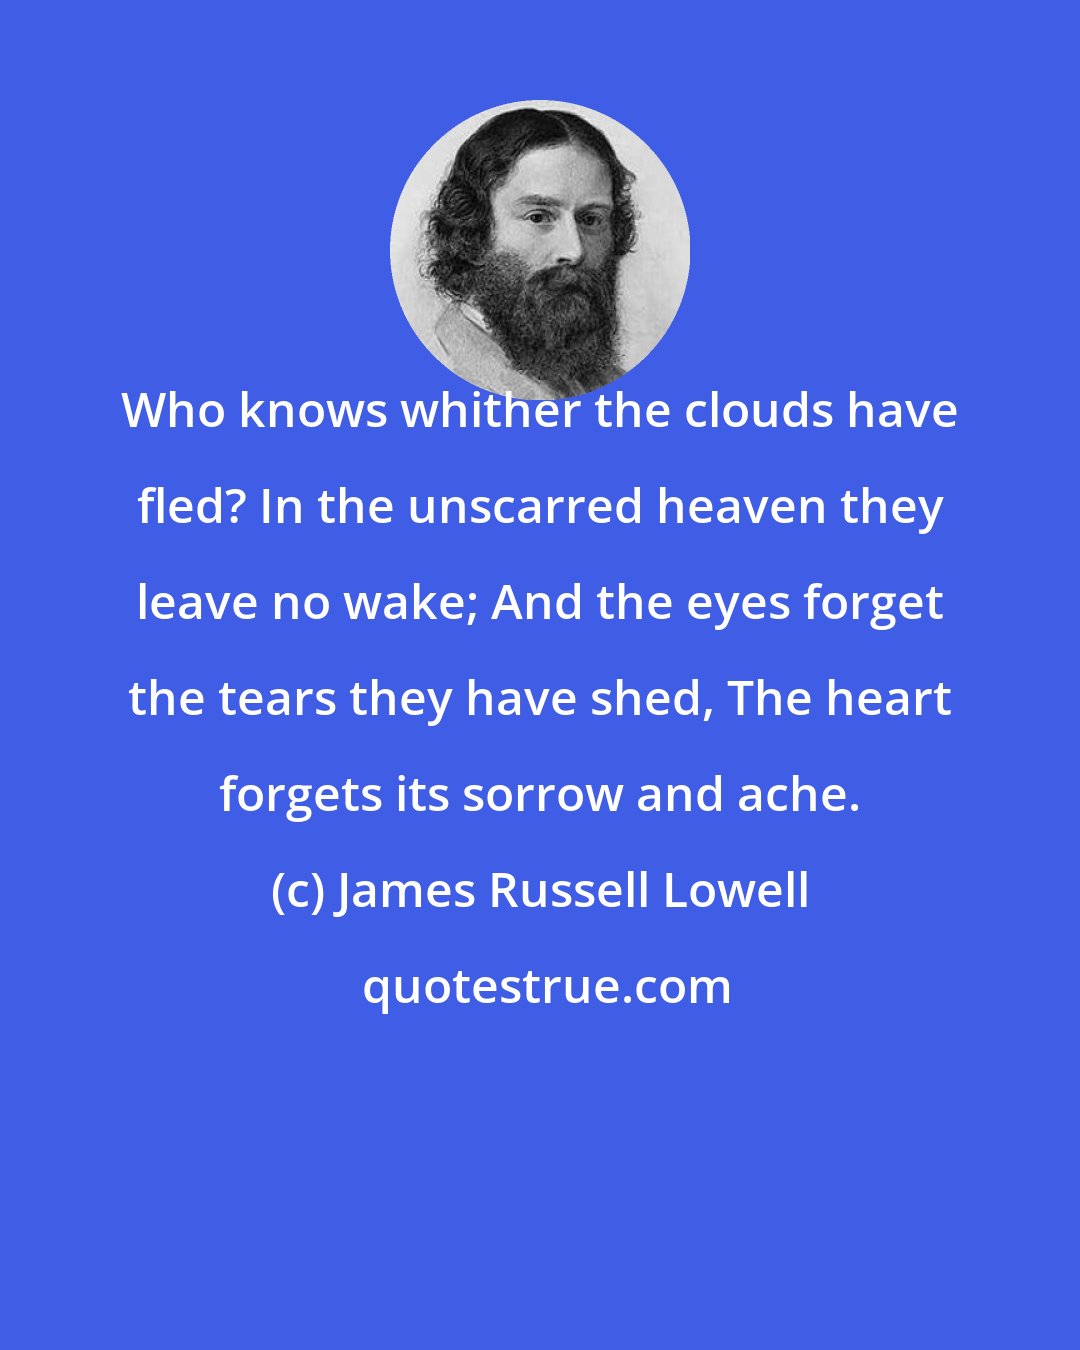 James Russell Lowell: Who knows whither the clouds have fled? In the unscarred heaven they leave no wake; And the eyes forget the tears they have shed, The heart forgets its sorrow and ache.